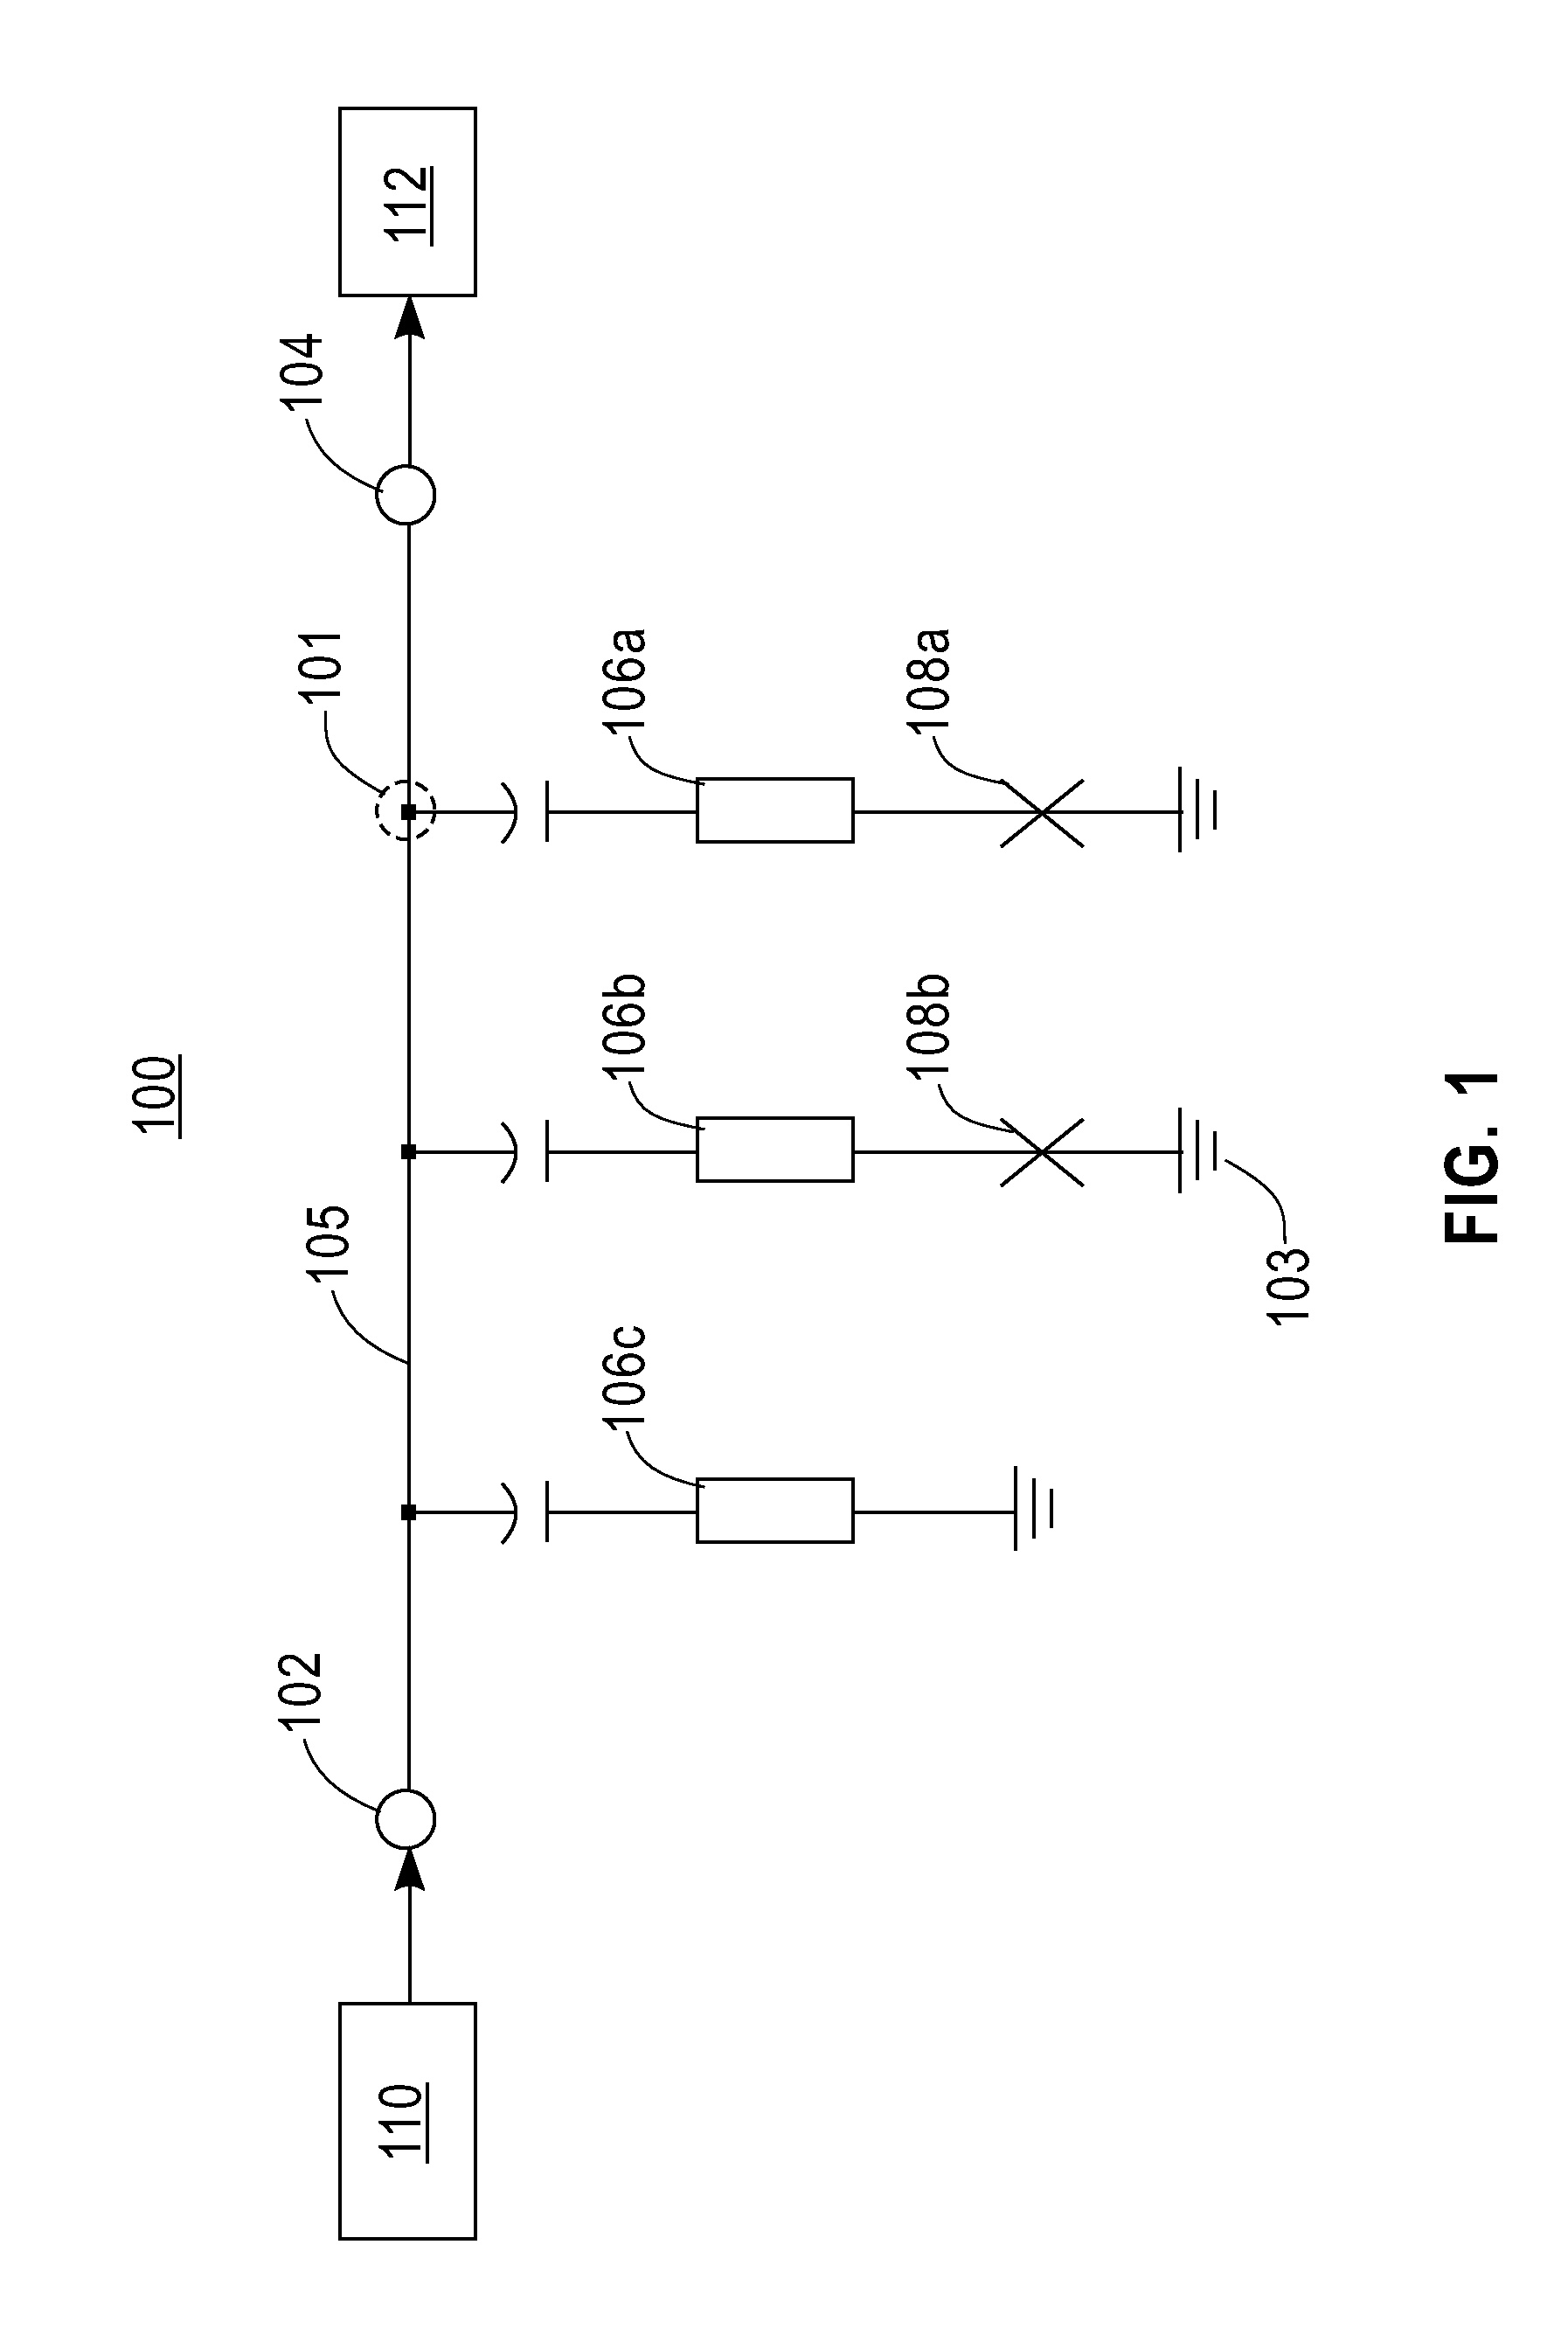 Yield Improvement for Josephson Junction Test Device Formation